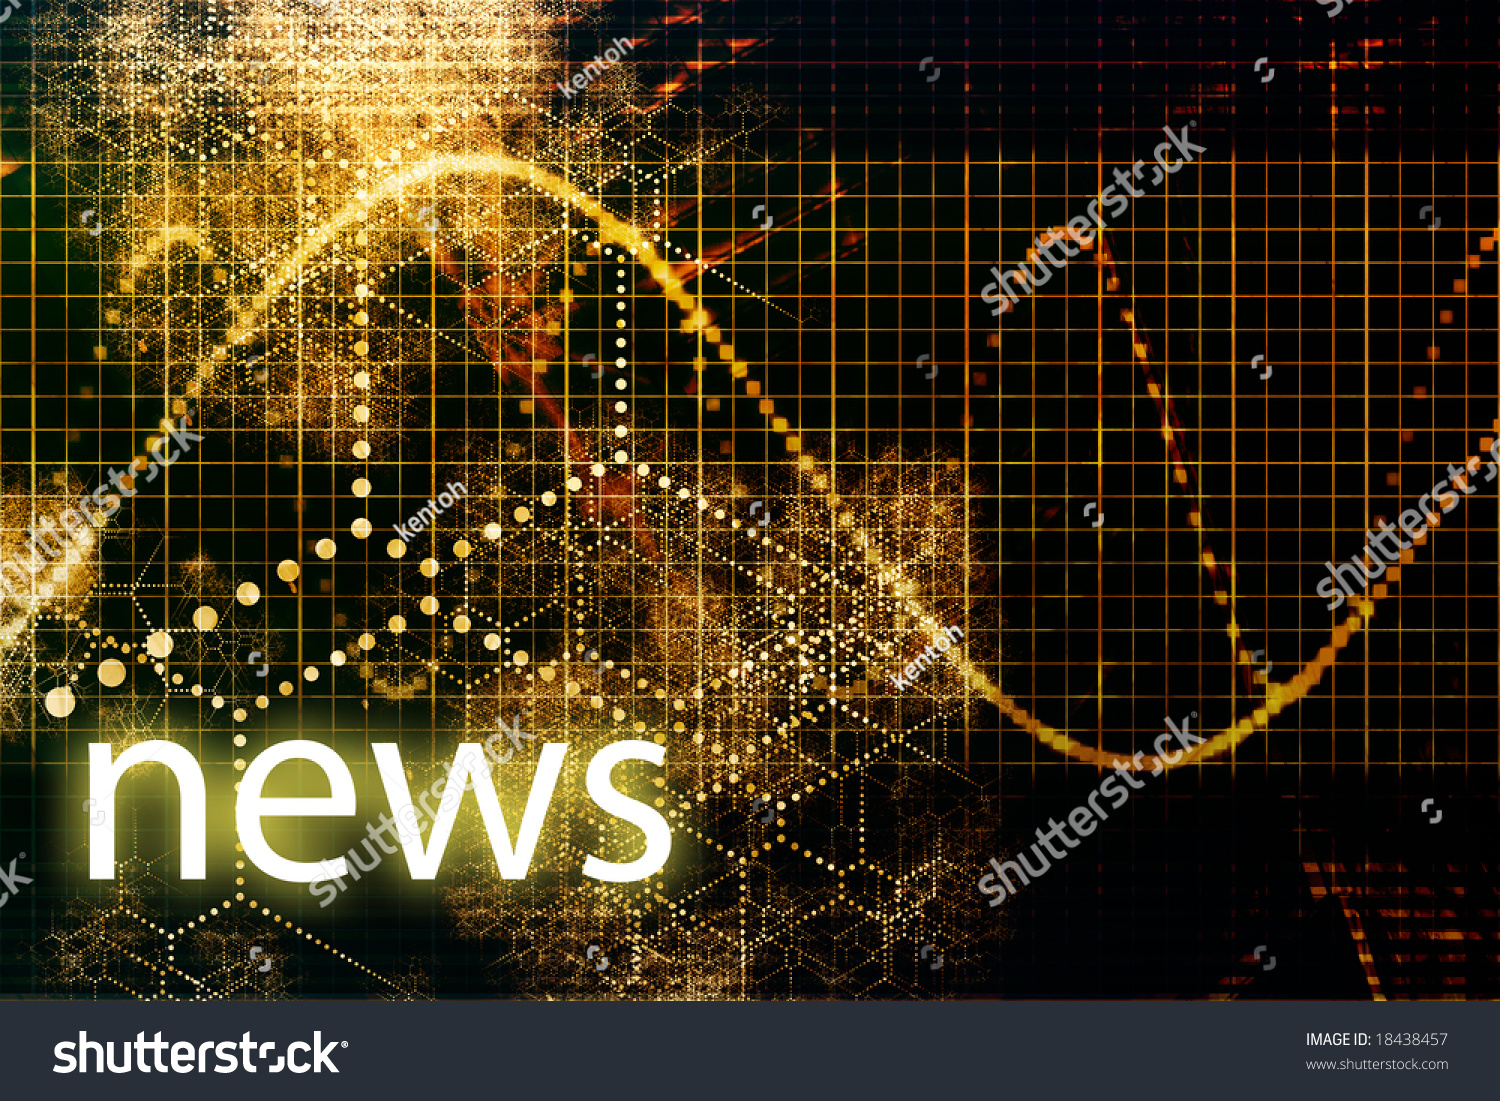 News Abstract Business Concept Wallpaper Presentation Stock